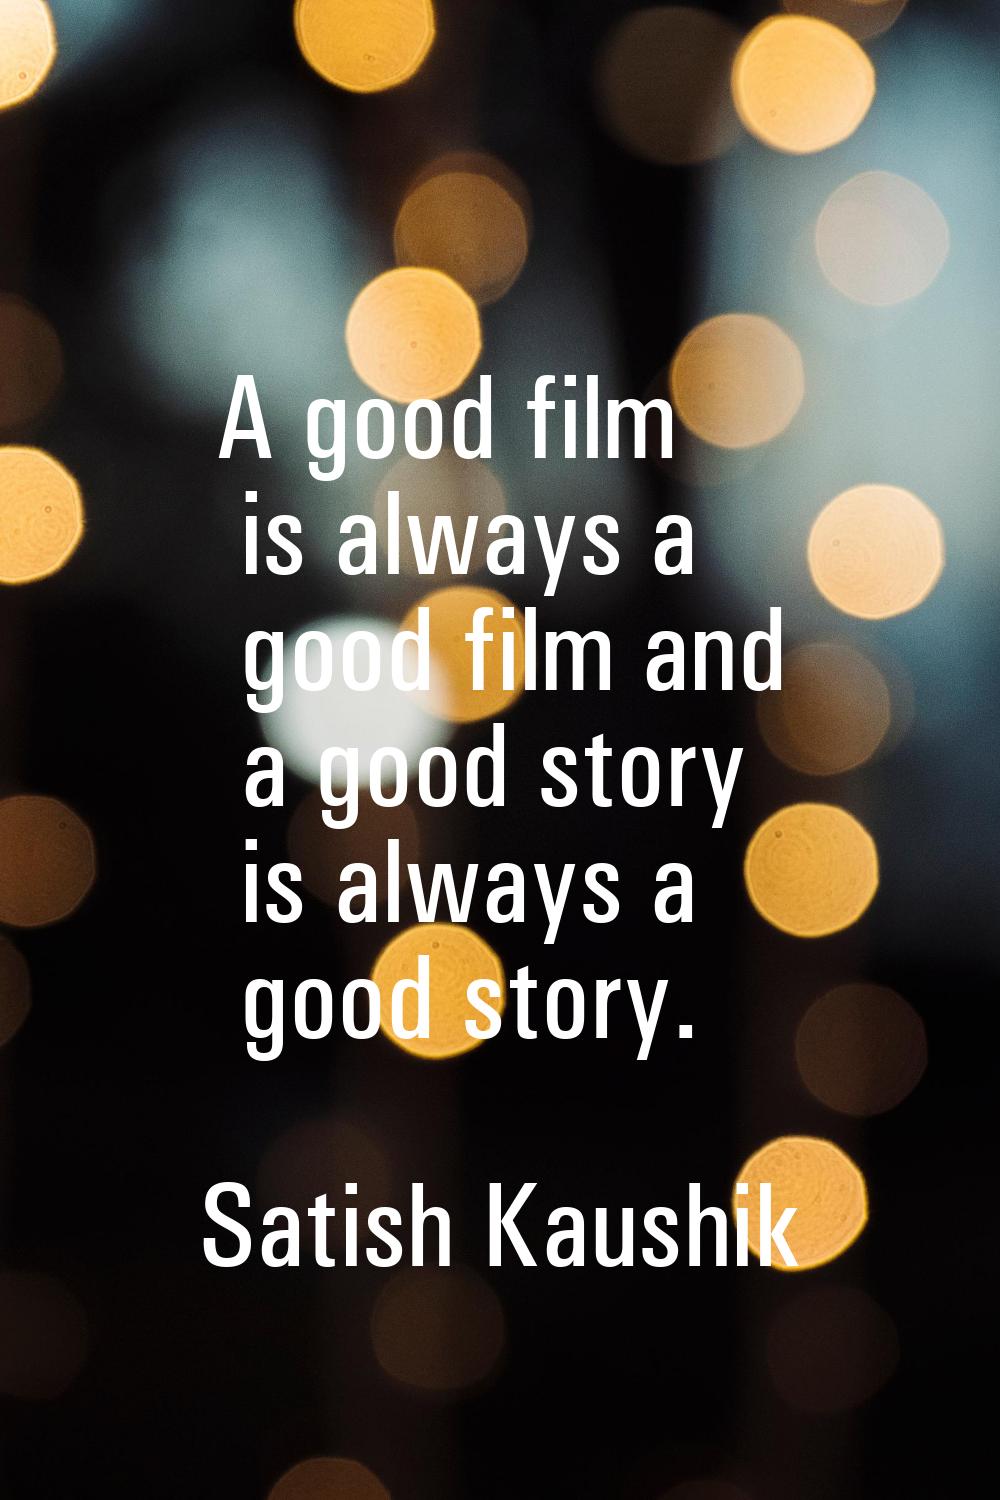 A good film is always a good film and a good story is always a good story.